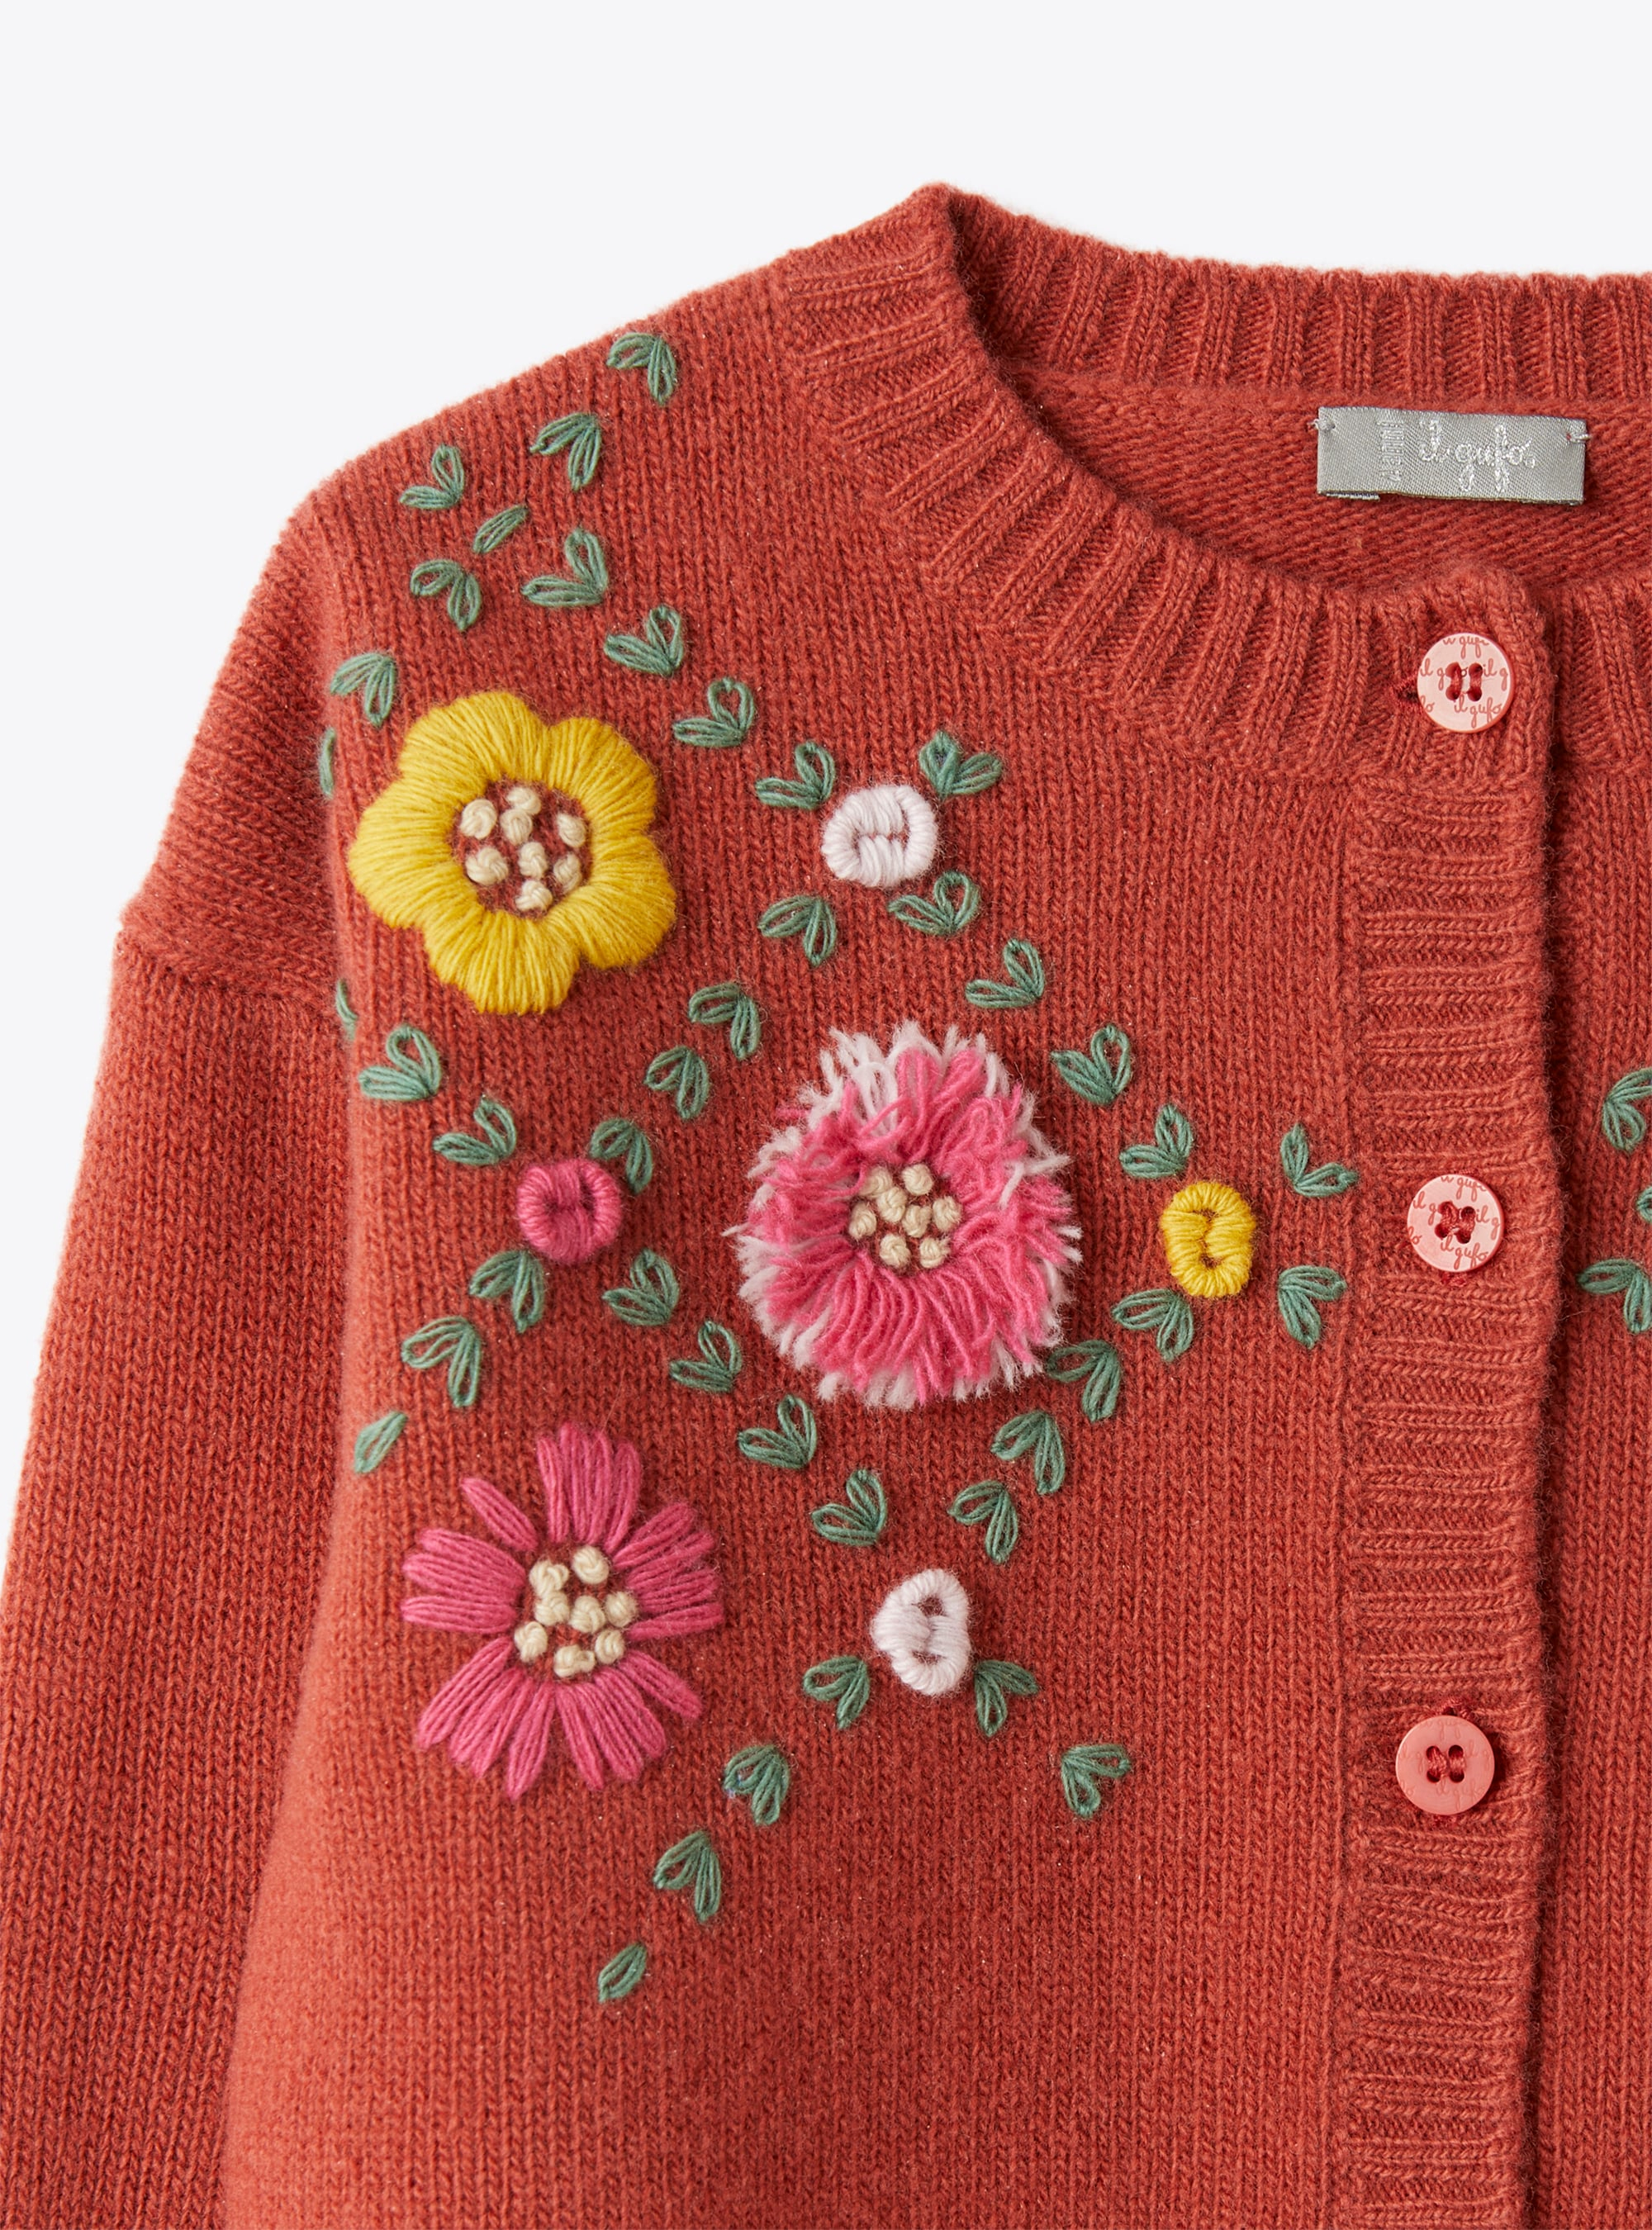 Cardigan with embroidered flowers - Red | Il Gufo